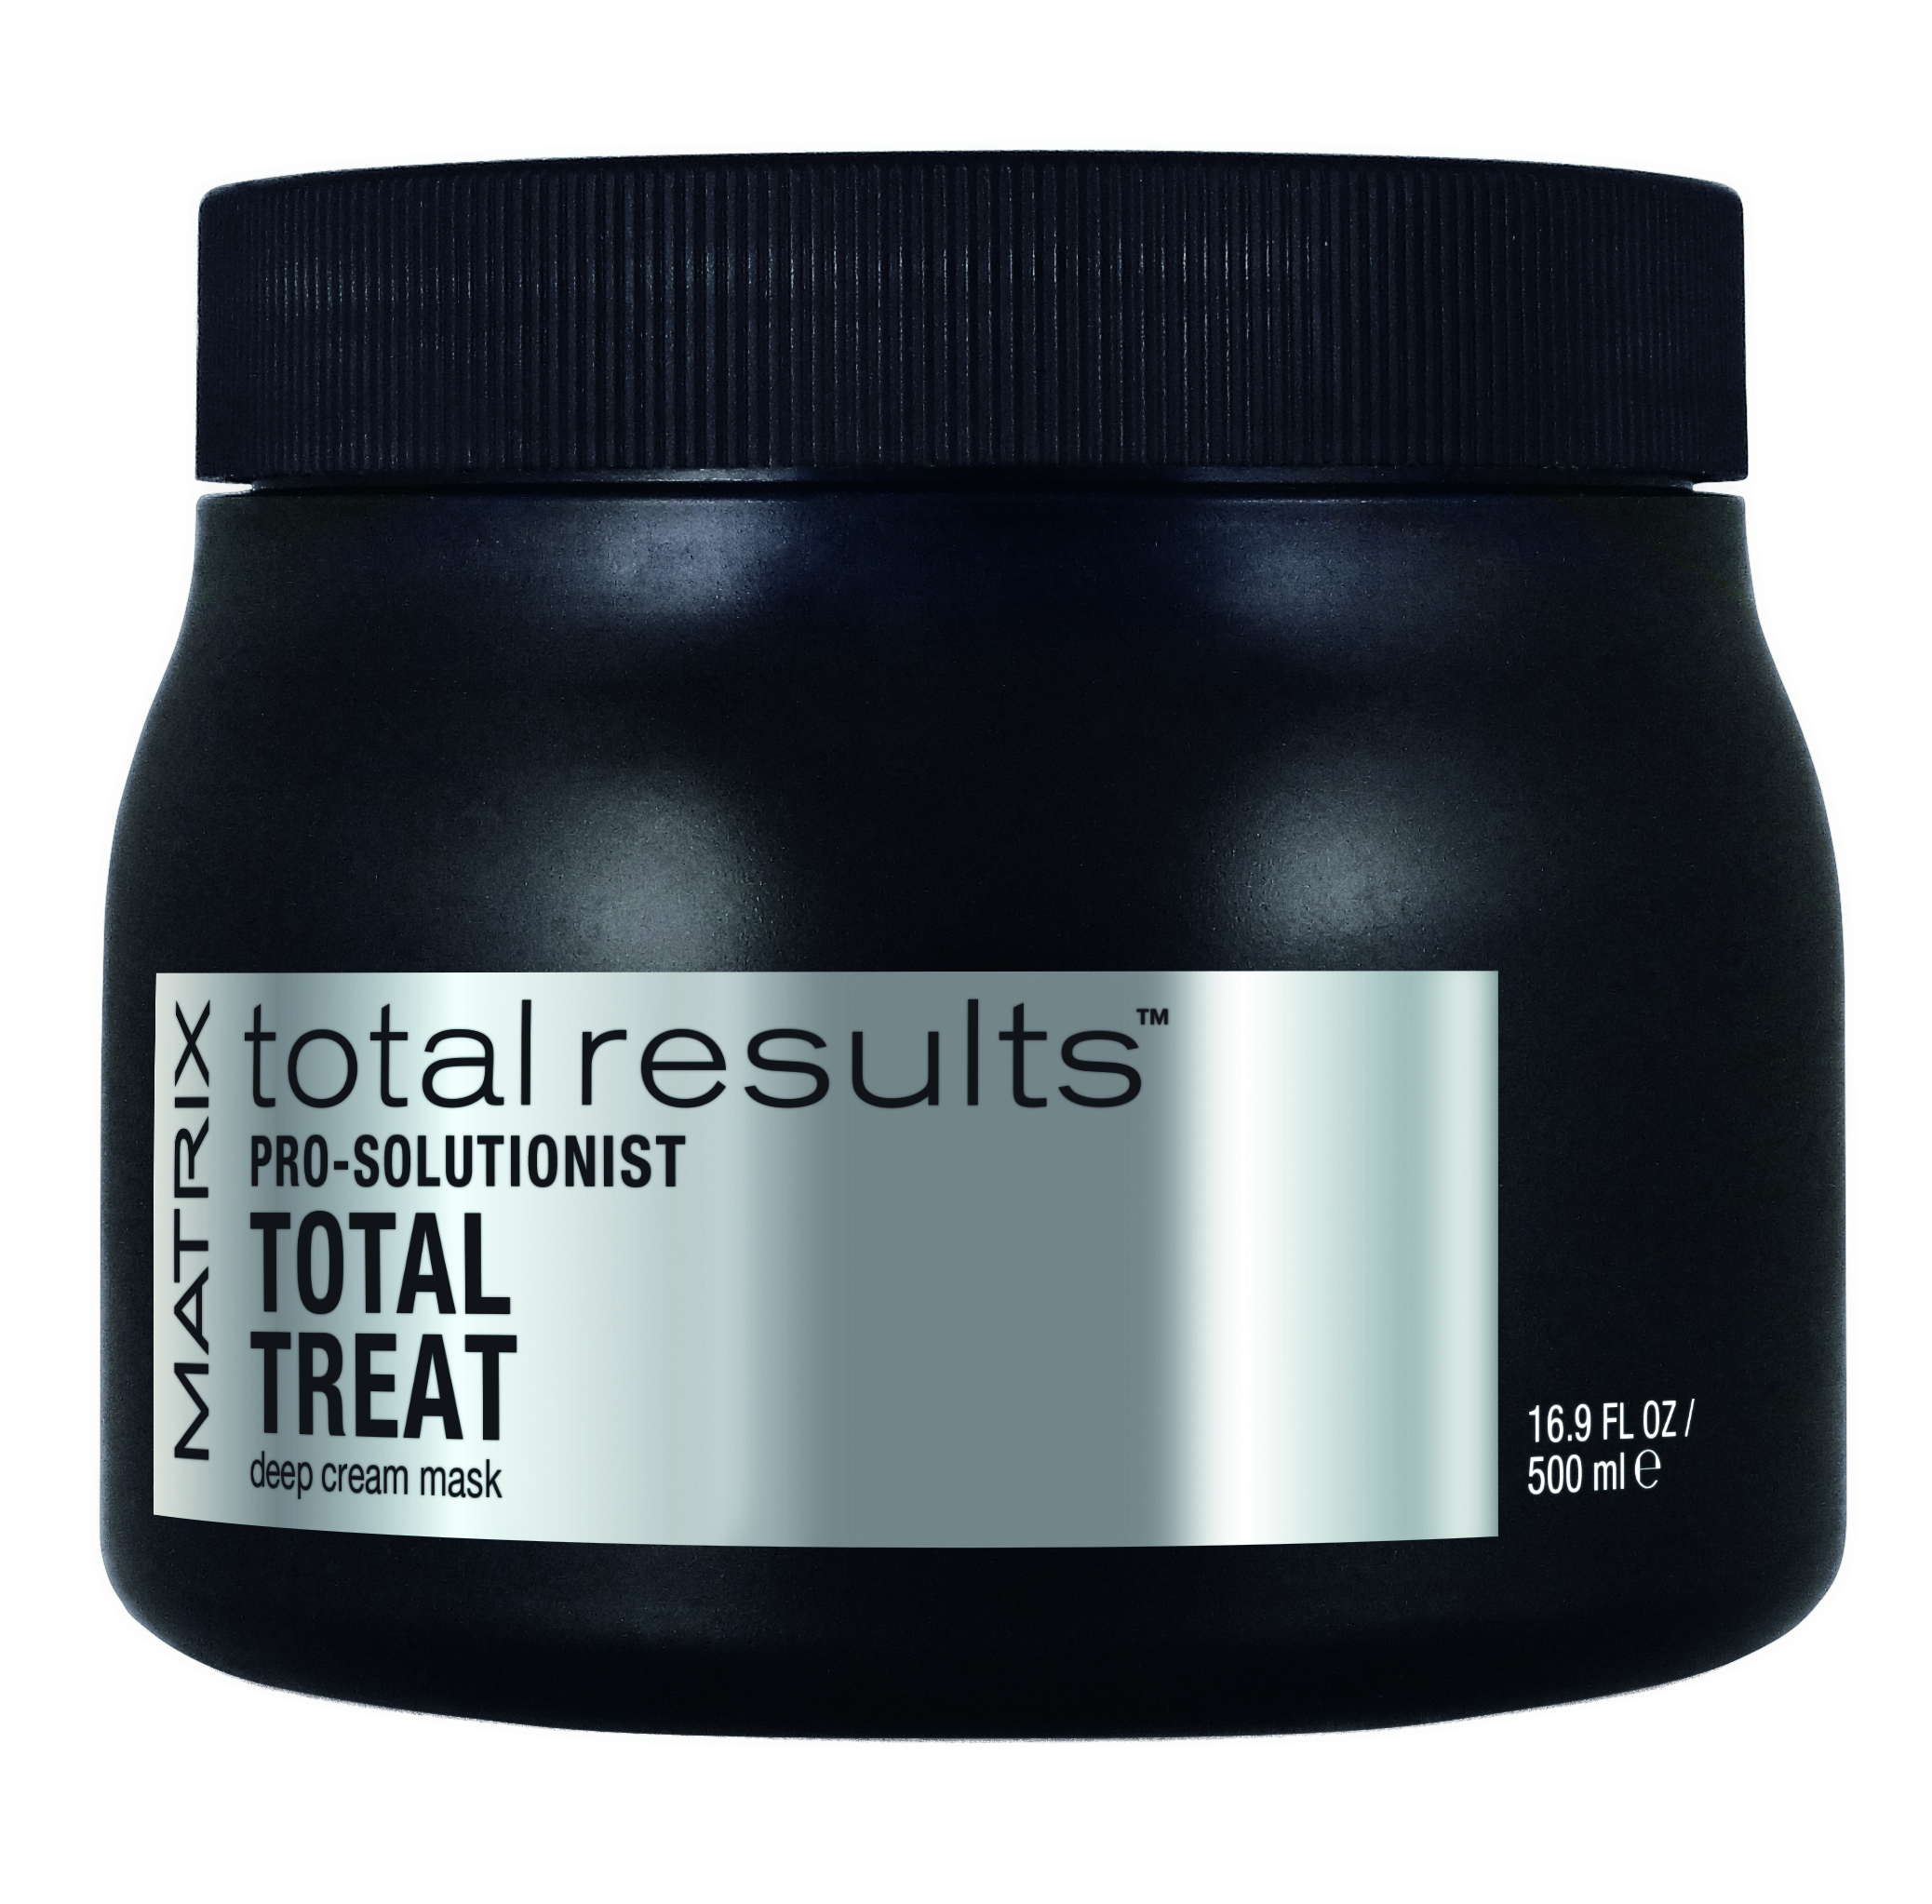 Total results Pro Solutionist Total Treat, 500ml